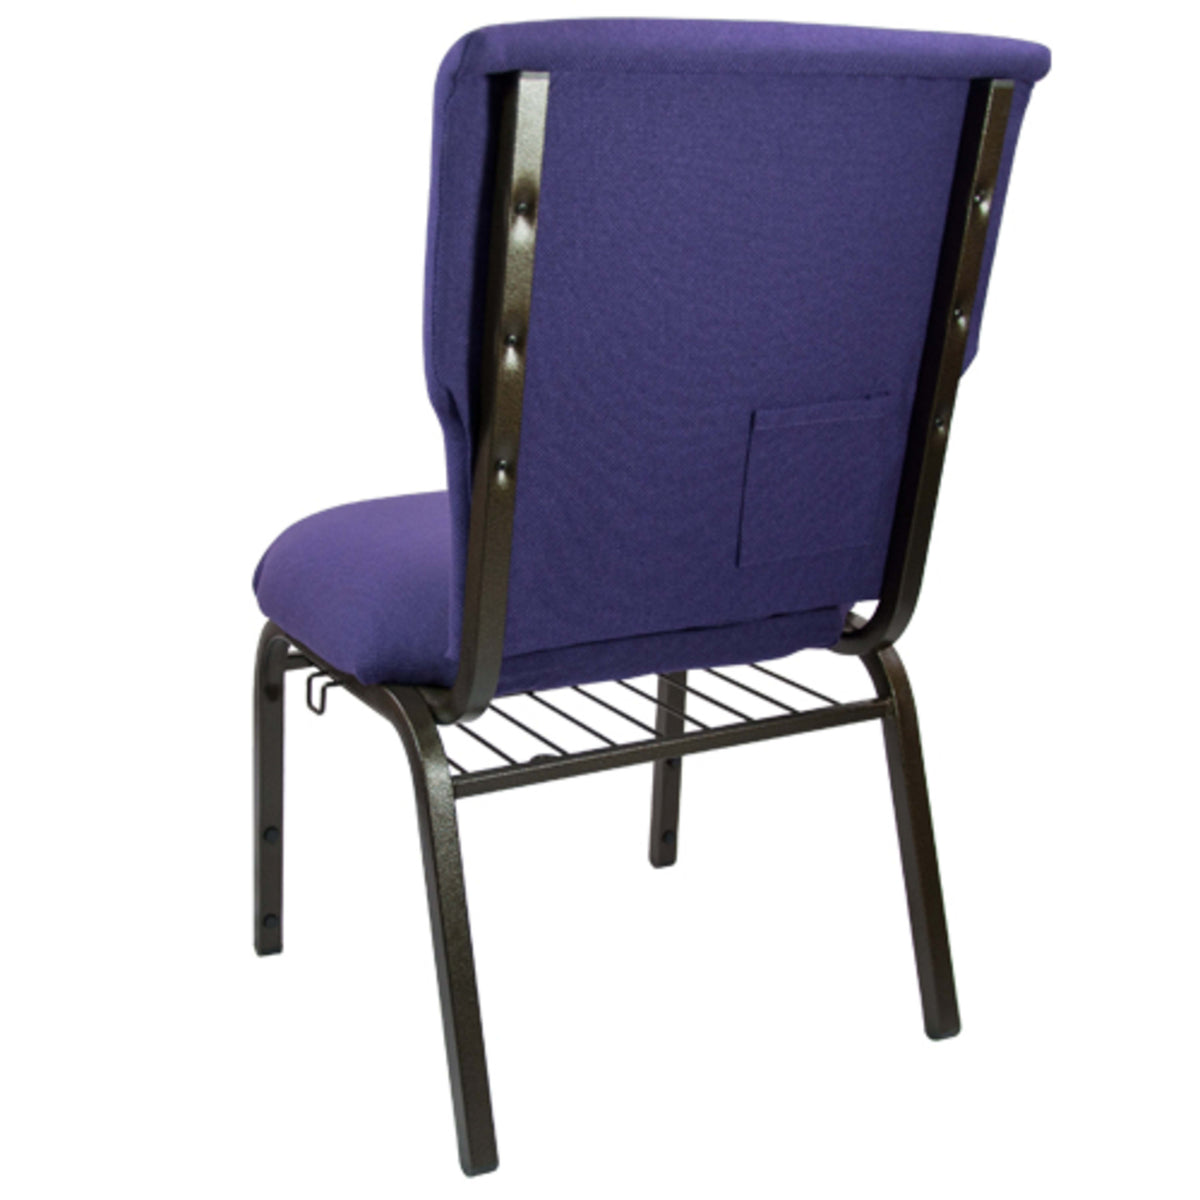 Eggplant Fabric/Gold Vein Frame |#| Eggplant Discount Church Chair - 21 in. Wide